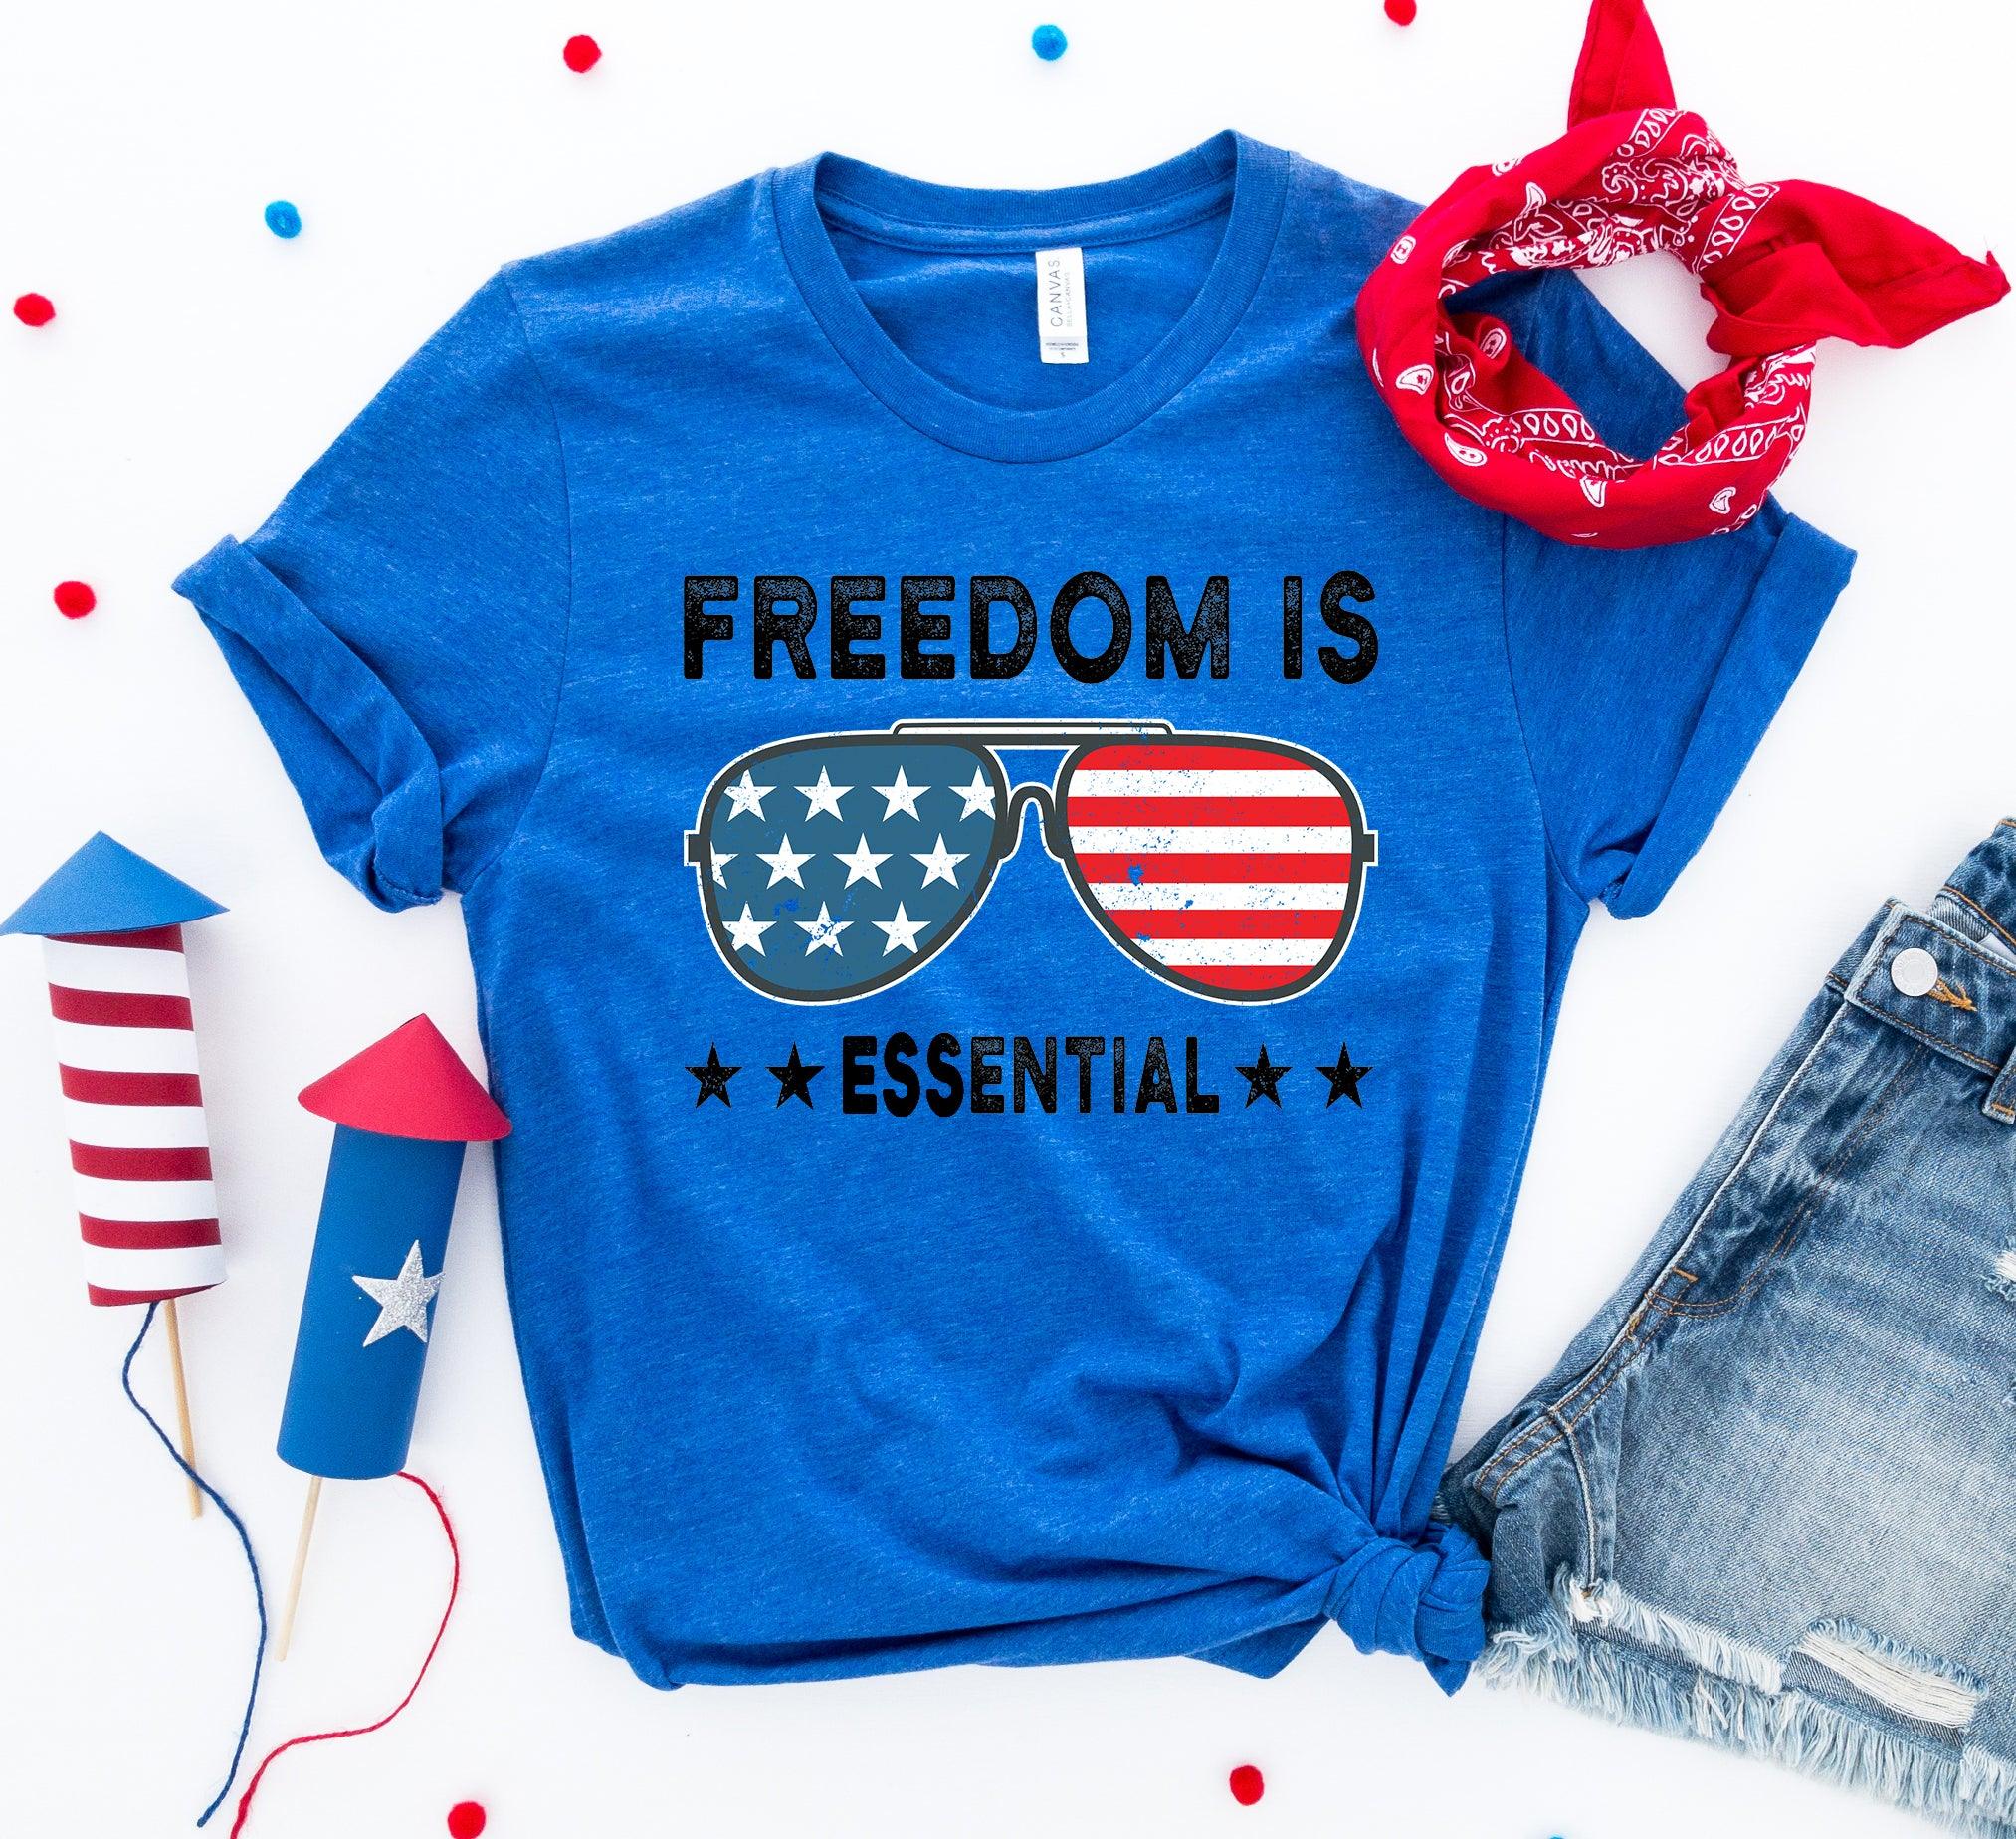 Freedom is essential T-shirt - VirtuousWares:Global